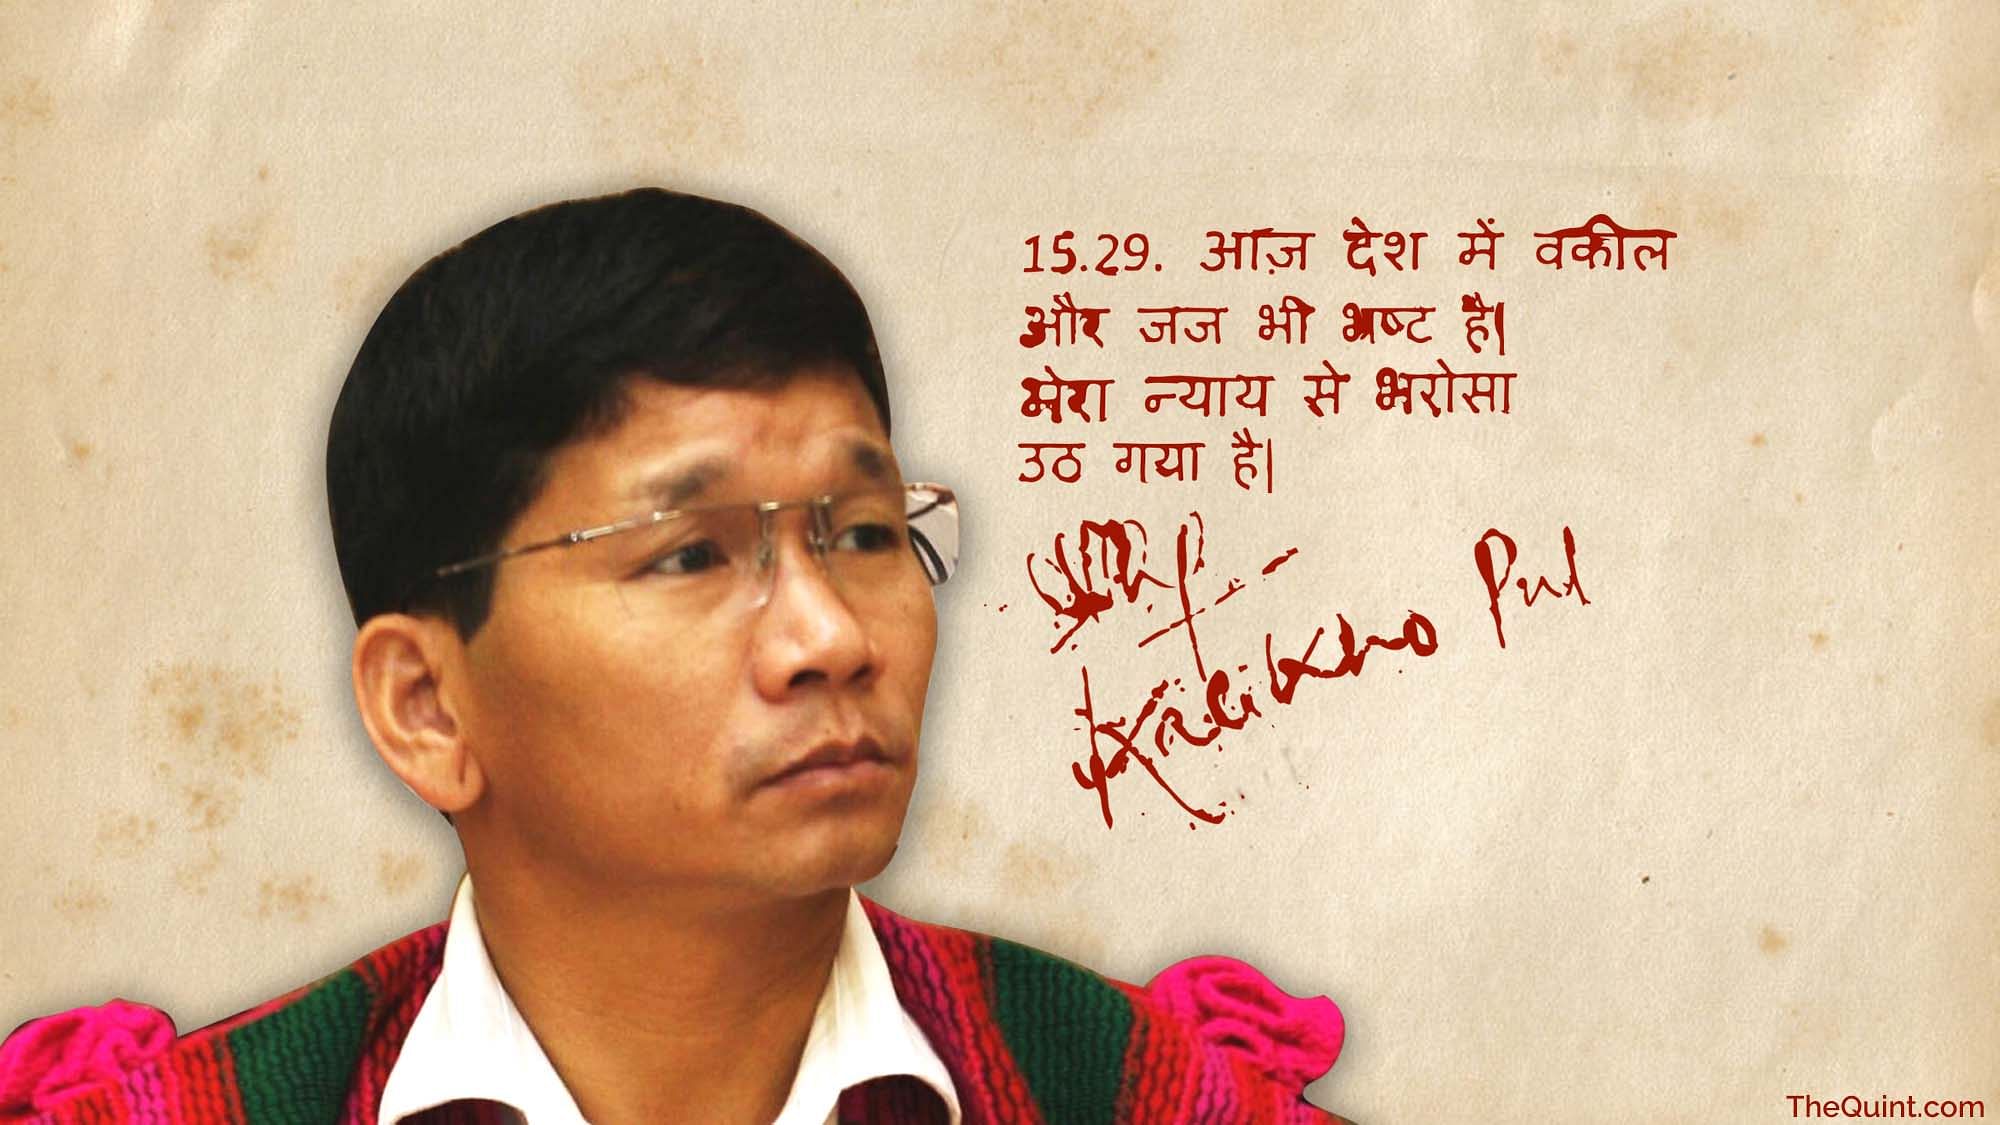 Late Arunachal Pradesh CM Kalikho Pul’s explosive suicide note reveals the names of four top law officials who sought huge bribes from him. (Photo: Harsh Sahani/<b>The Quint</b>)